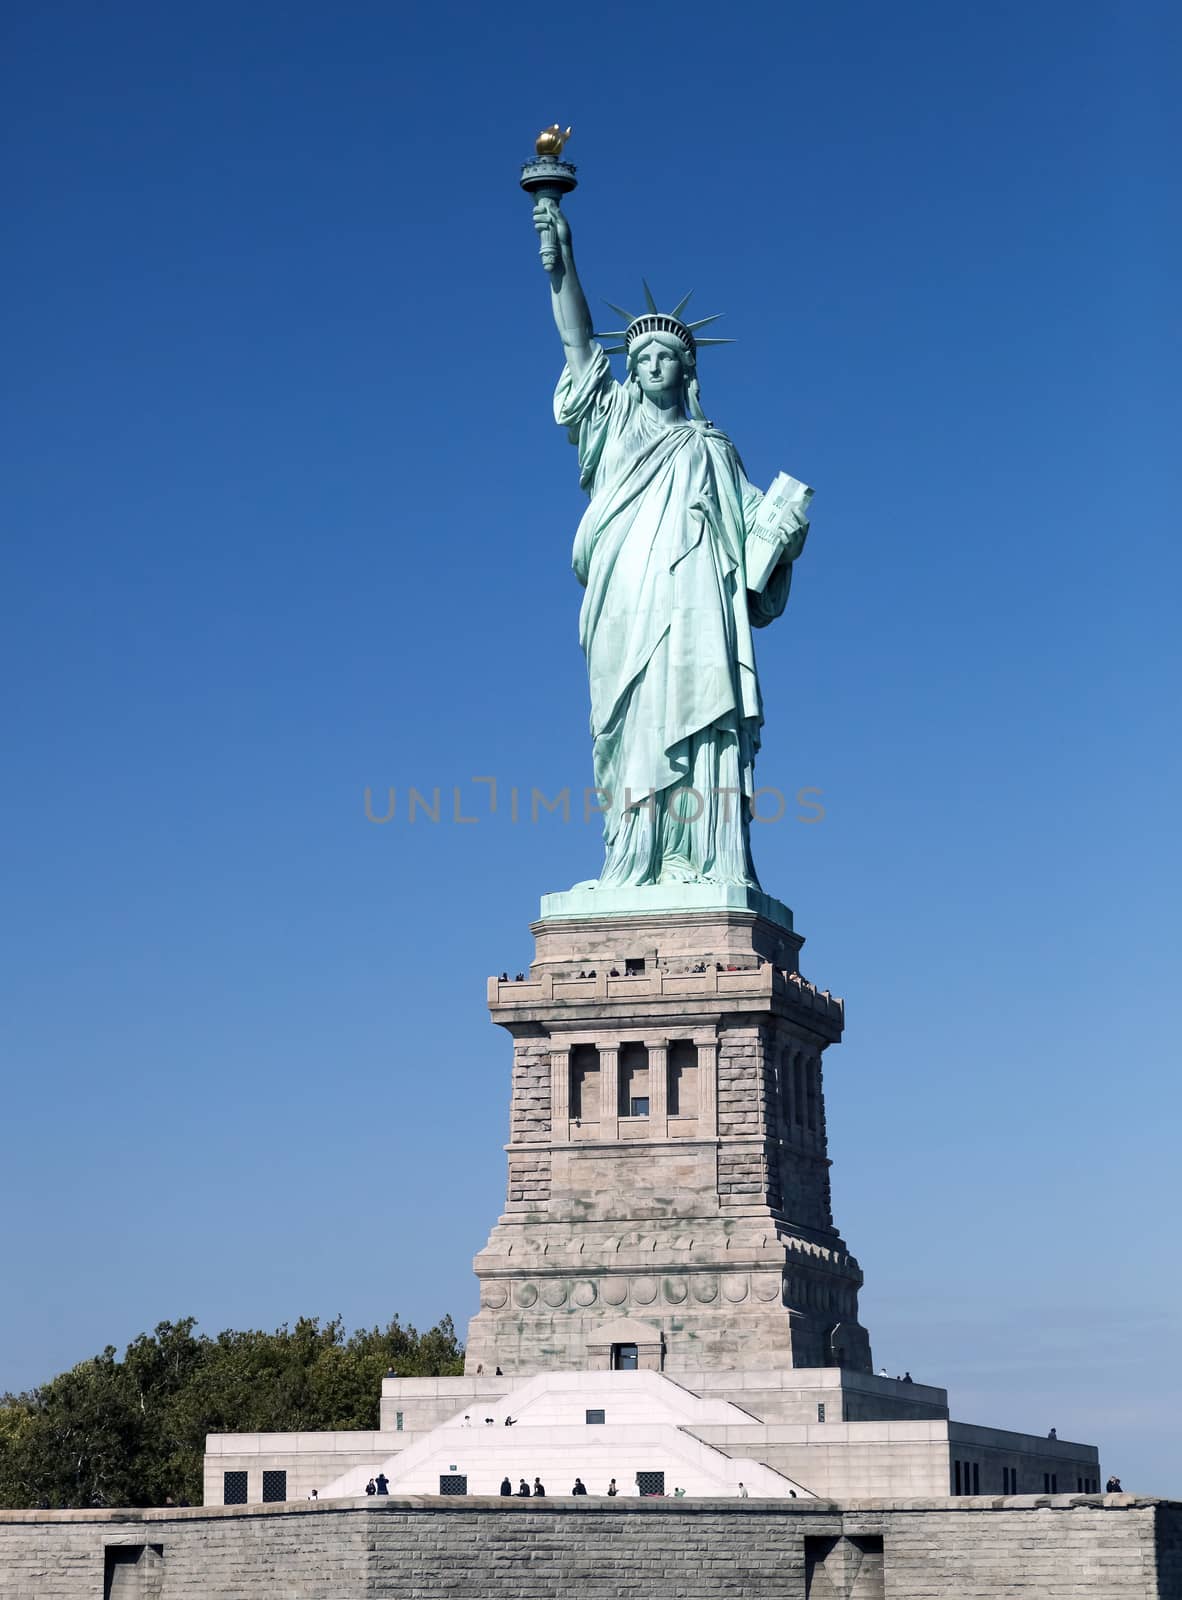 USA, New York, The Statue of Liberty by hanusst